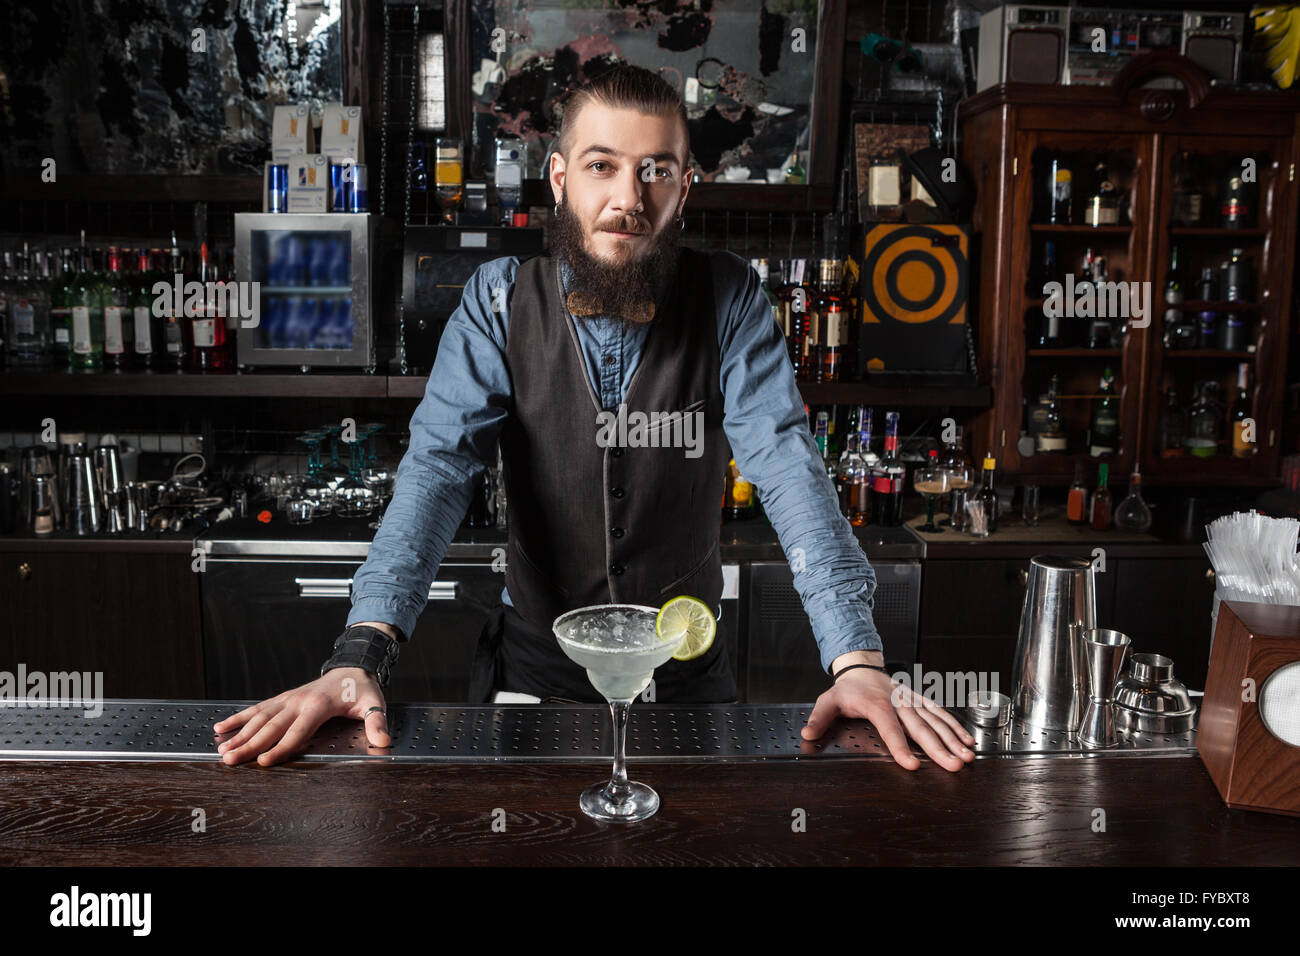 This is a photograph of barman serving cocktail margarita. Stock Photo